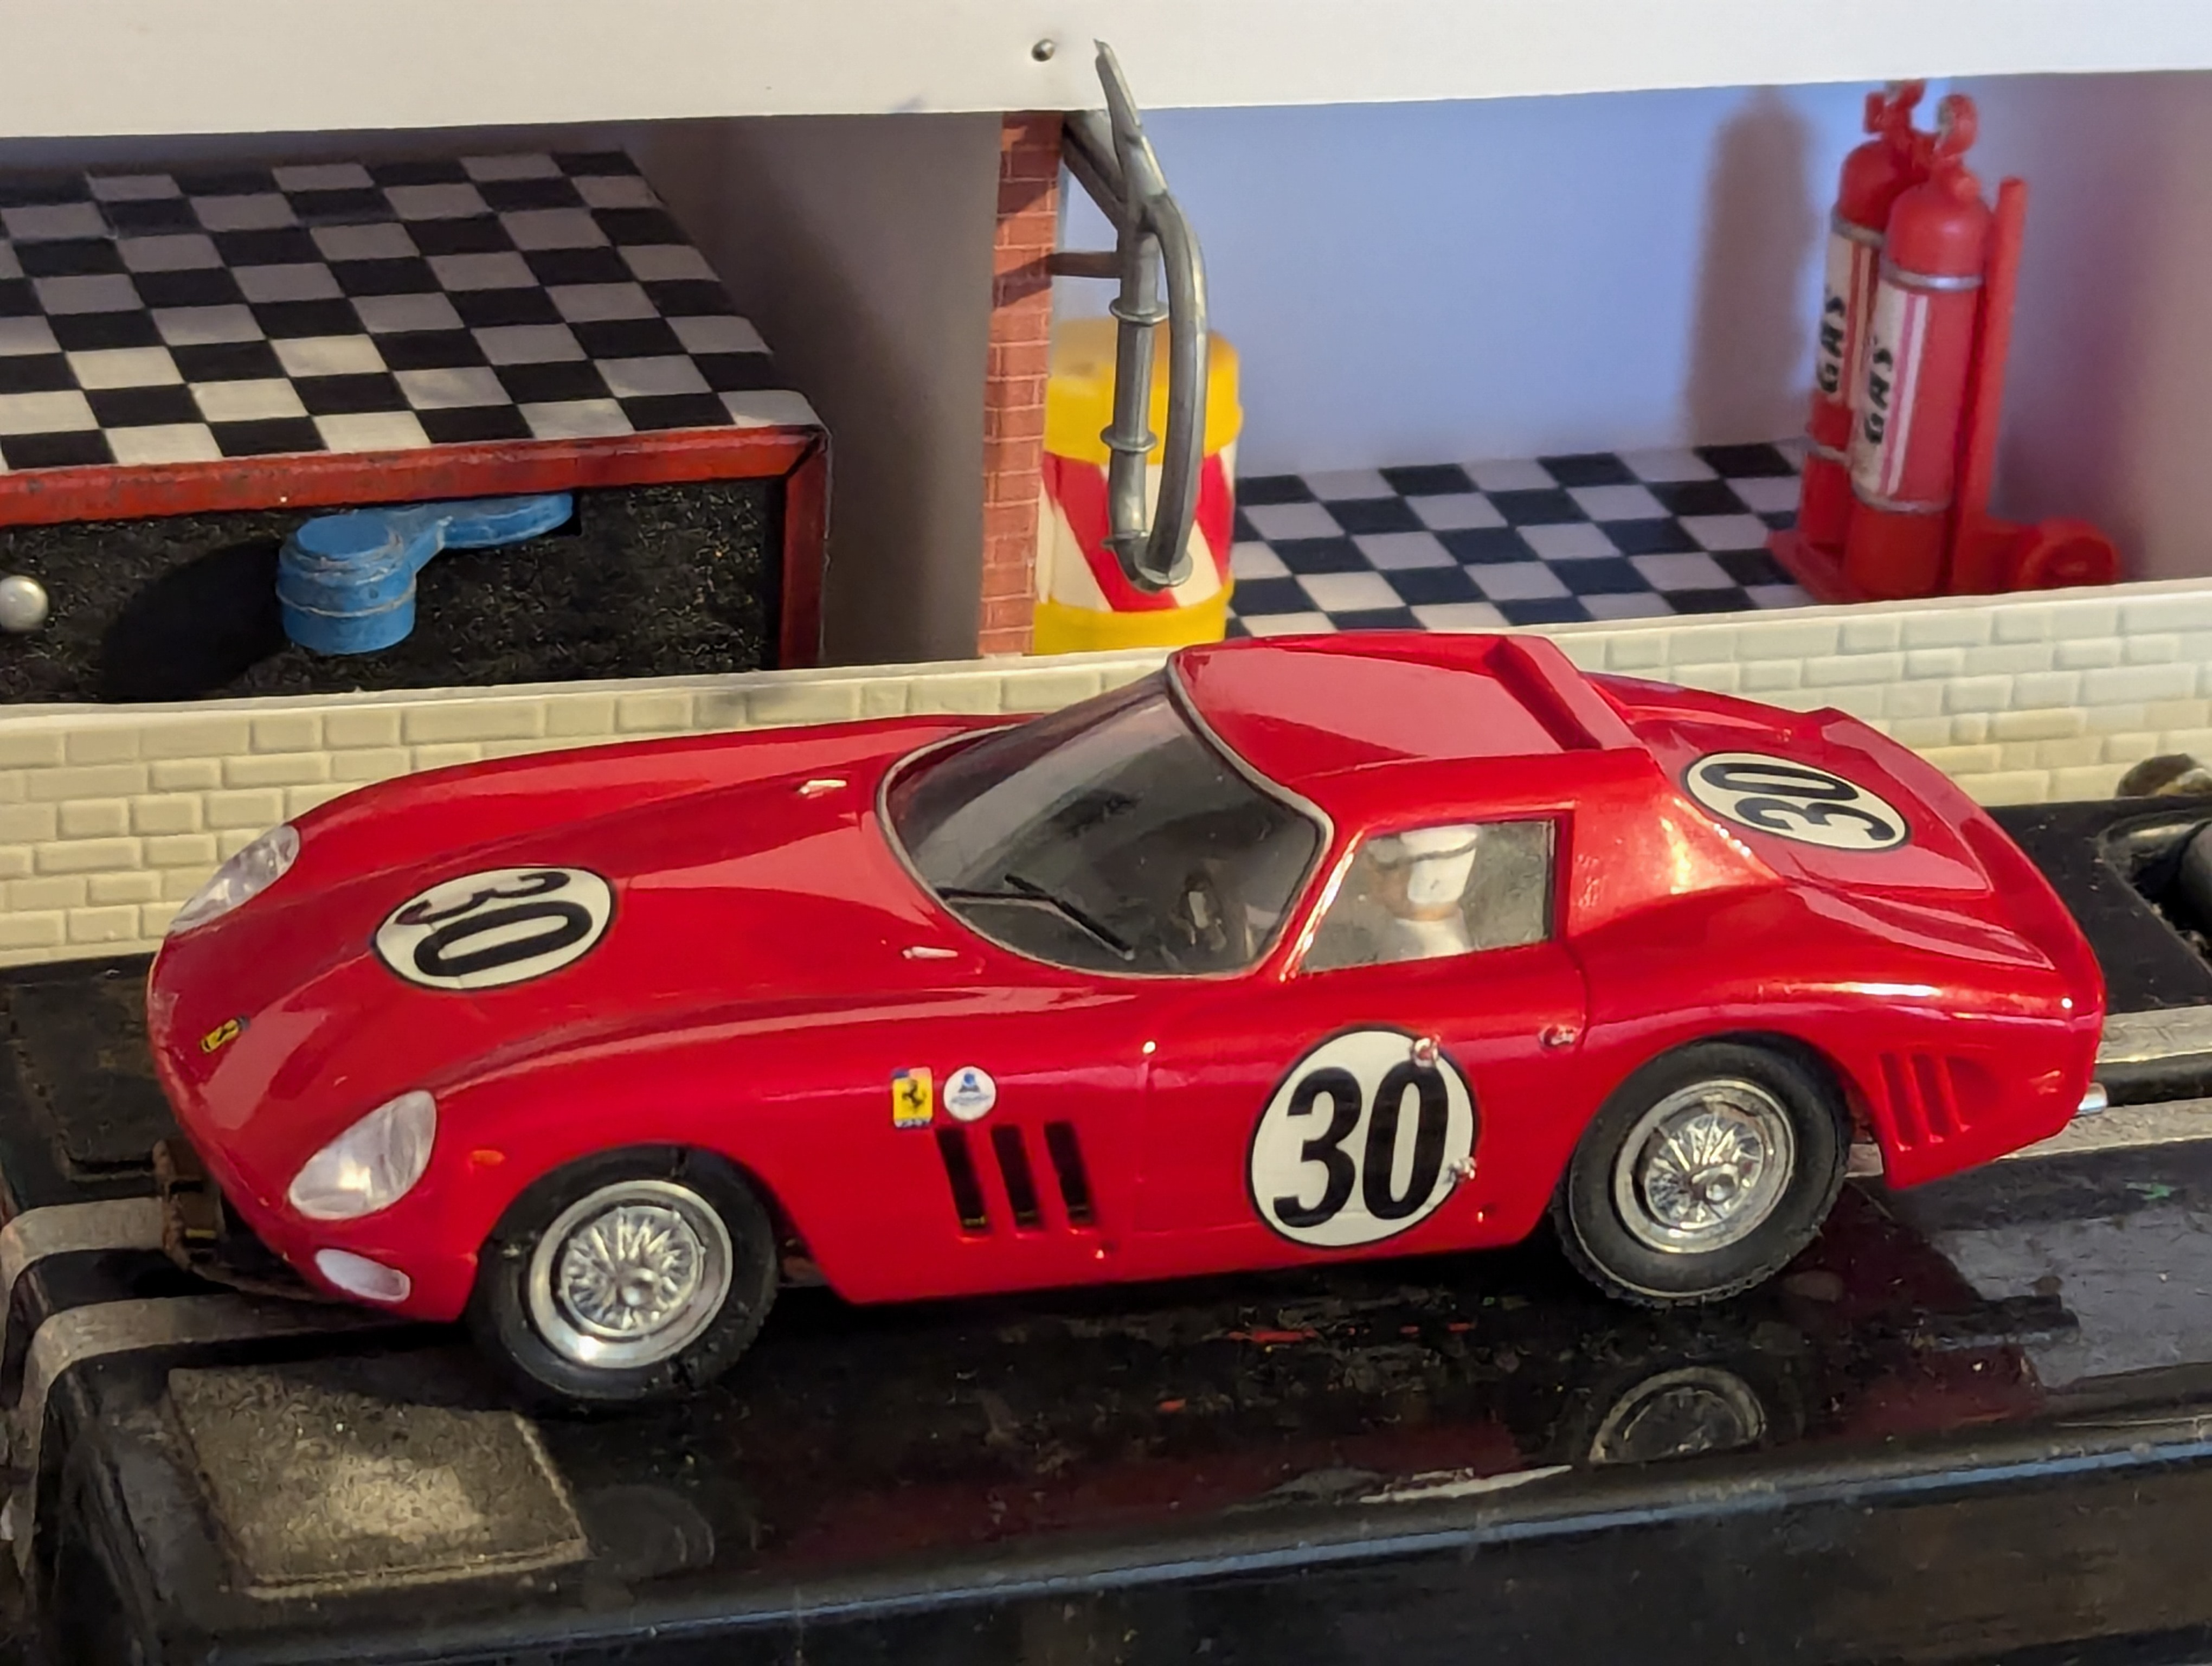 1964 Ferrari 250 GTO LM - Modern issue  Kit Car  - 1st issue chassis